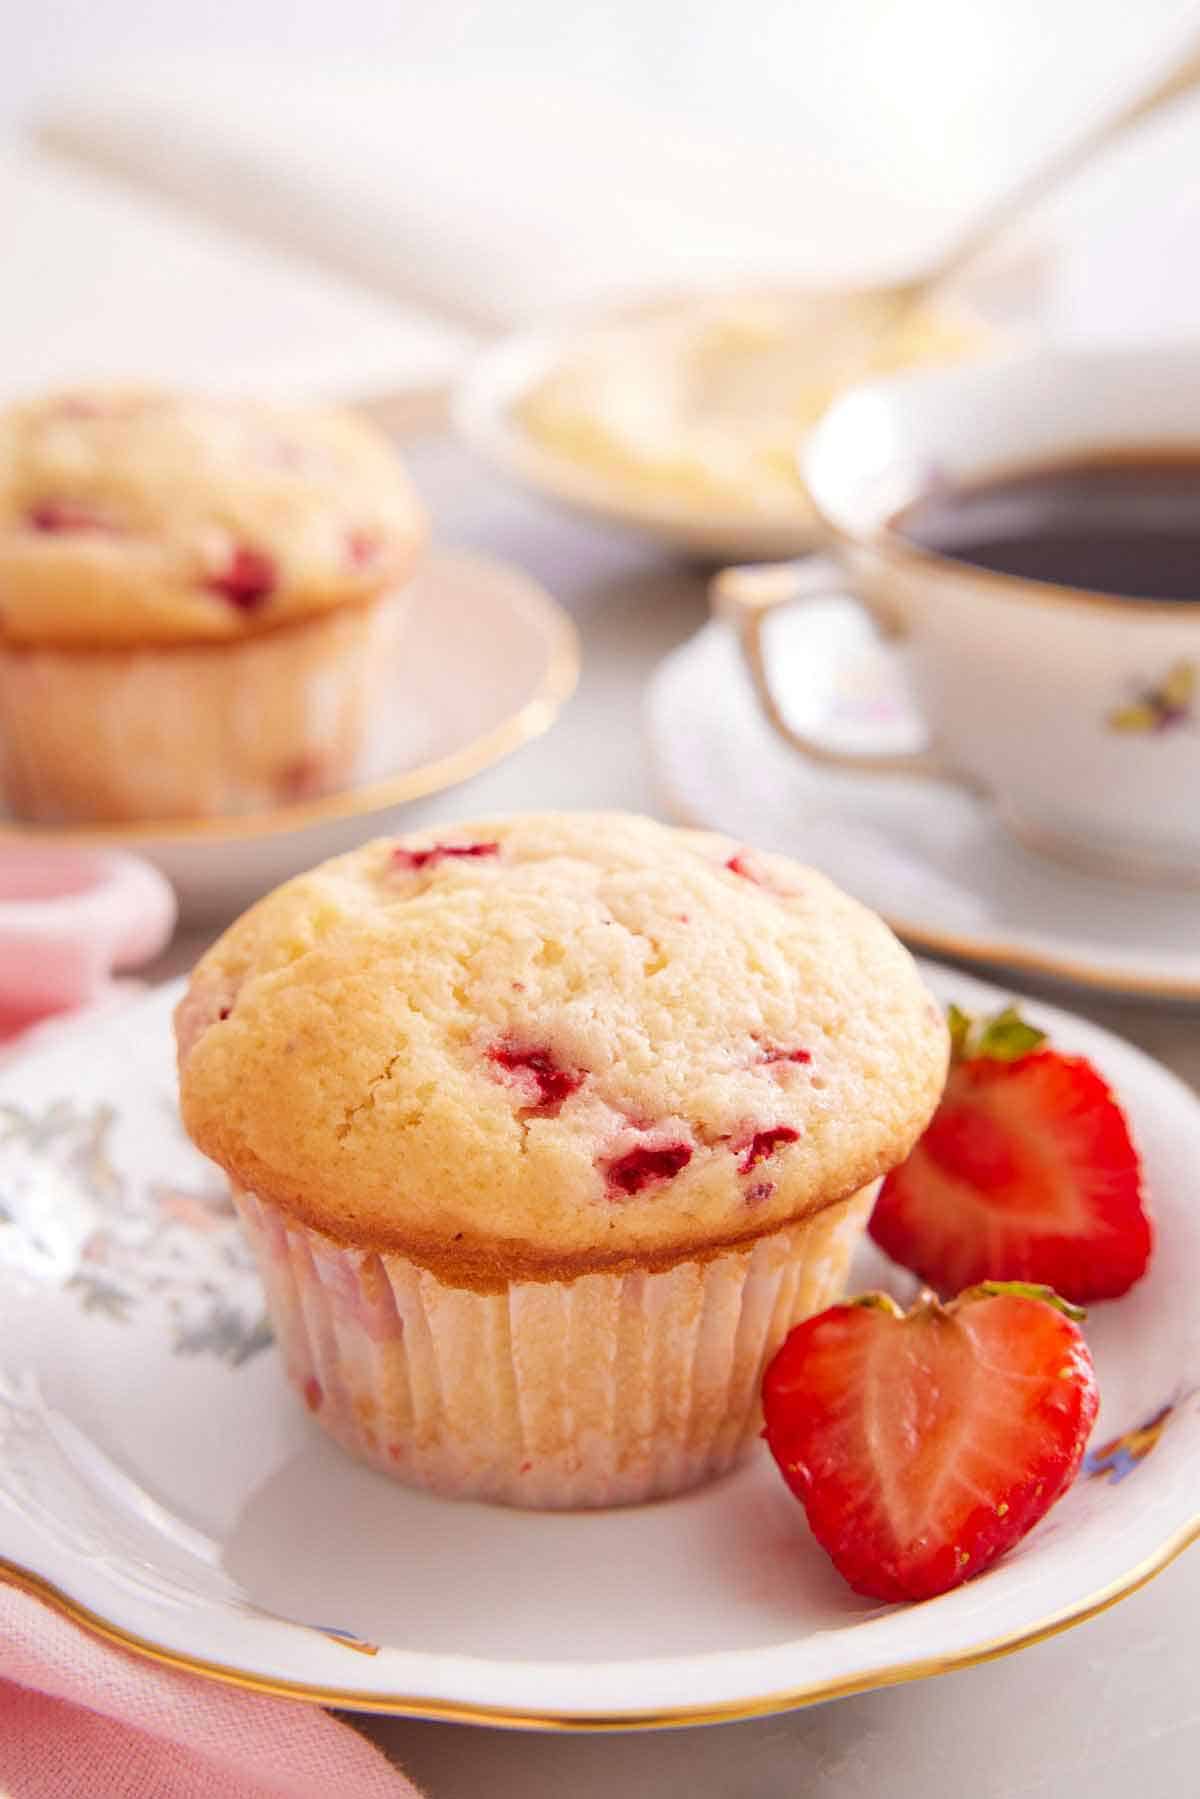 A plate with a strawberry muffin with a cut strawberry with a glass of coffee and second muffin in the background.